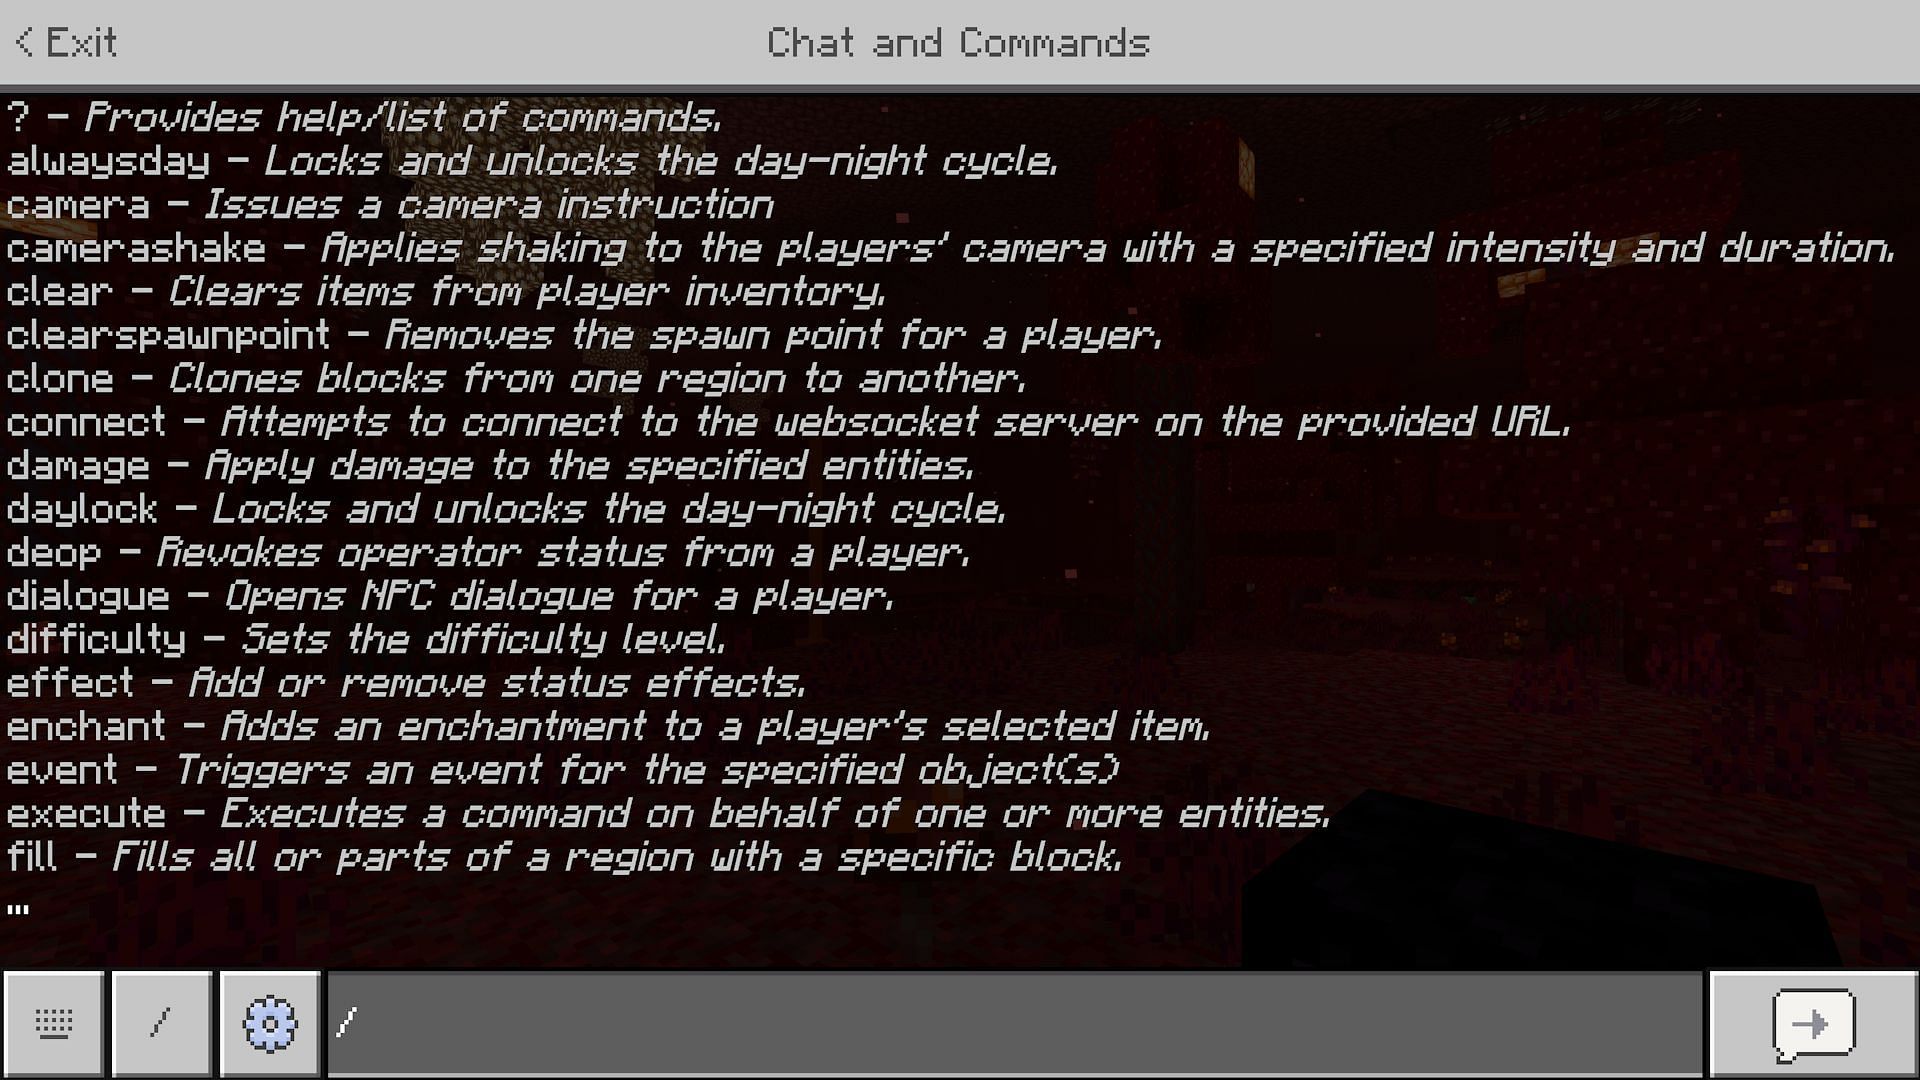 Hitting the forward slash key will also work to open chat and start using commands (Image via Mojang Studios)